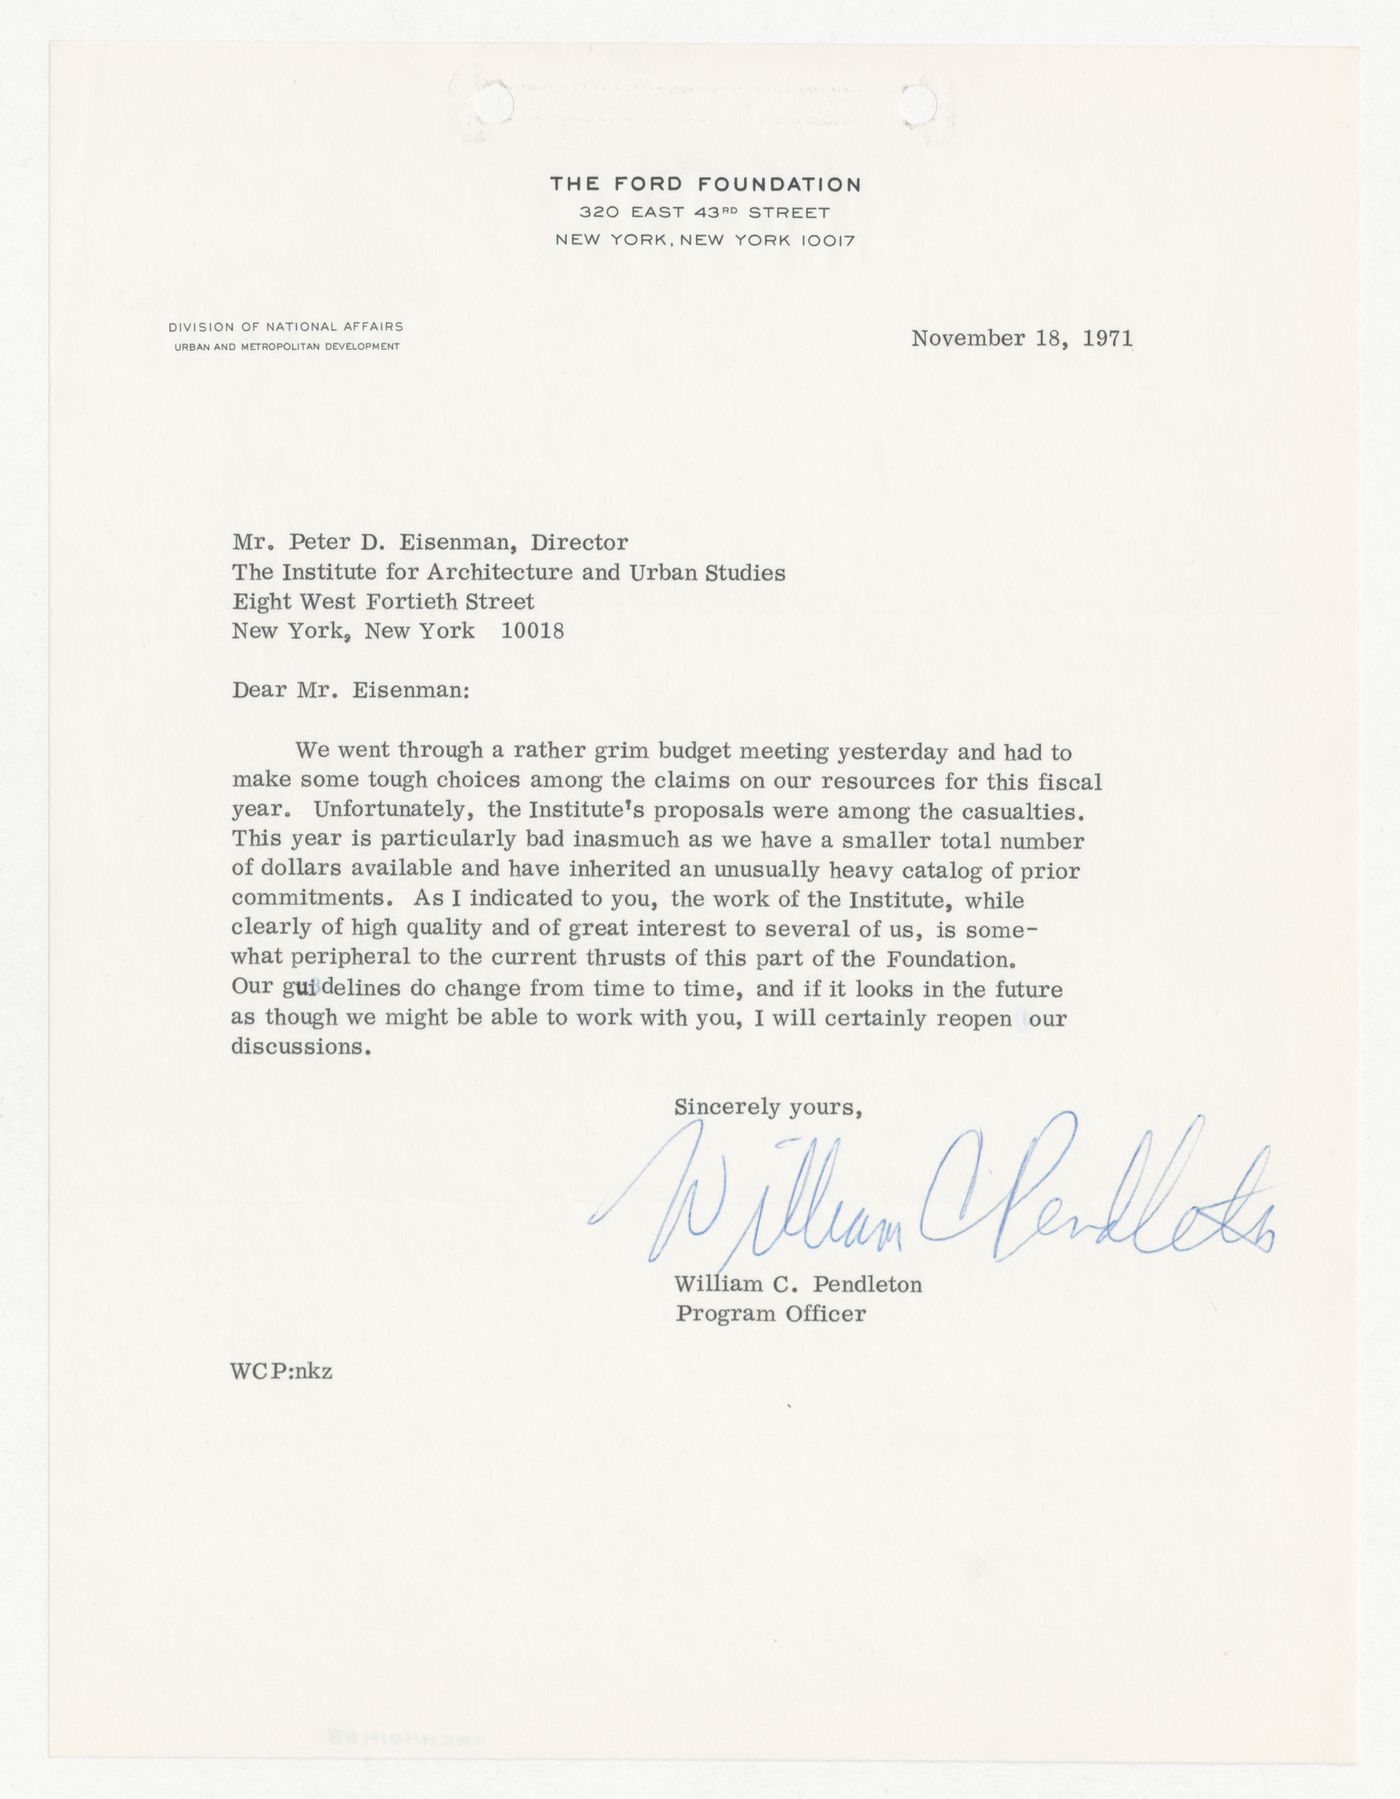 Letter from William C. Pendleton to Peter D. Eisenman about funding from the Ford Foundation